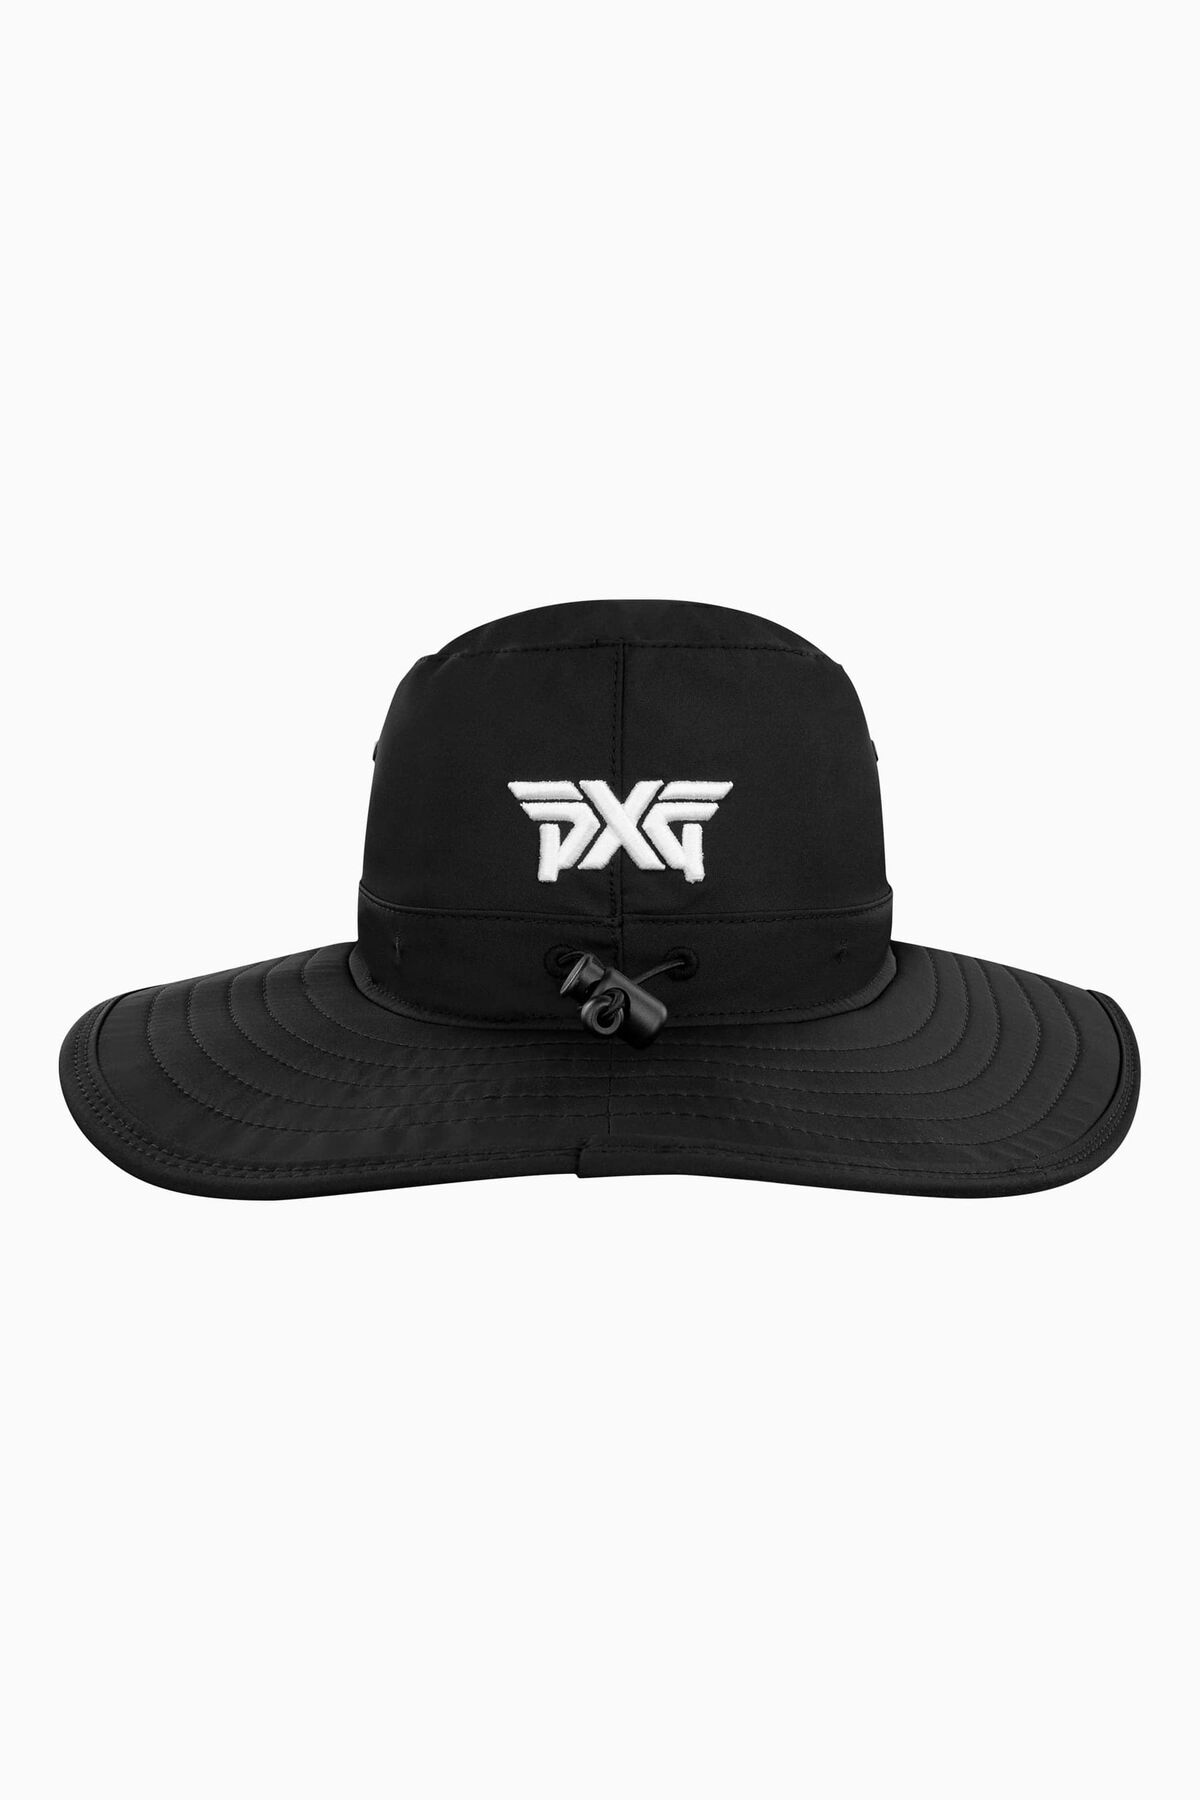 Prolight Bush Hat  Shop the Highest Quality Golf Apparel, Gear,  Accessories and Golf Clubs at PXG